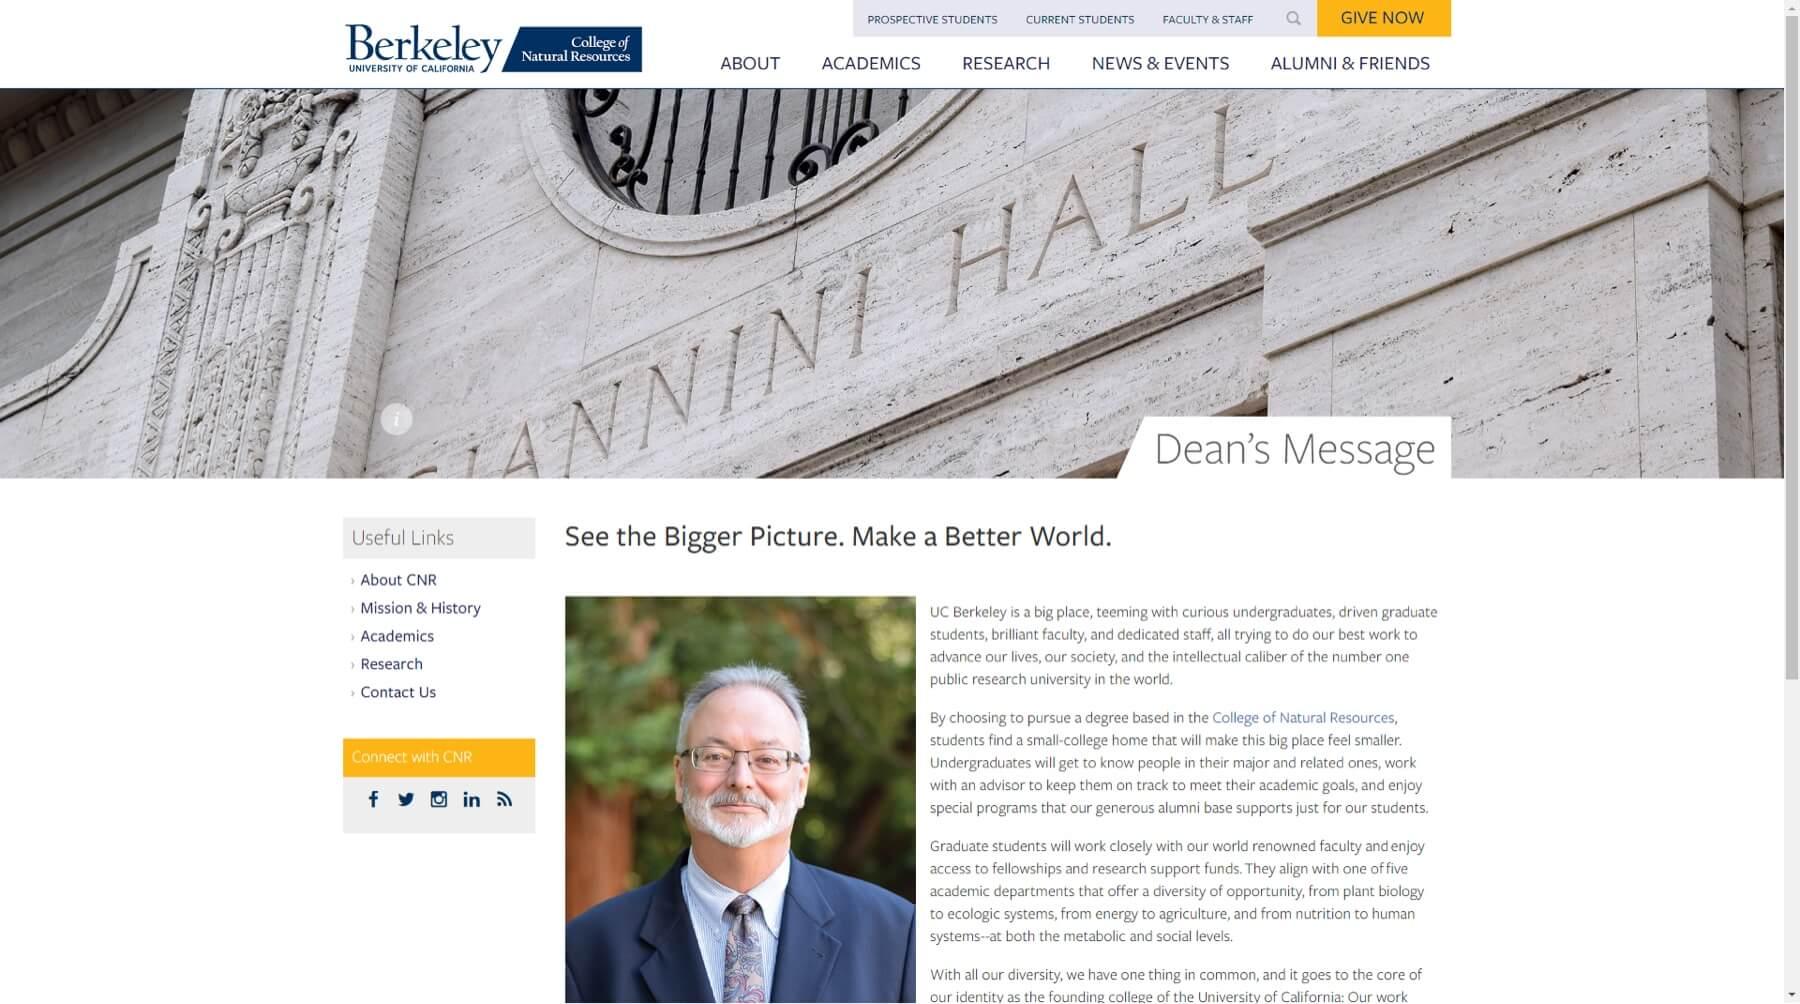 A screenshot of the College of Natural Resources' Dean's Message page